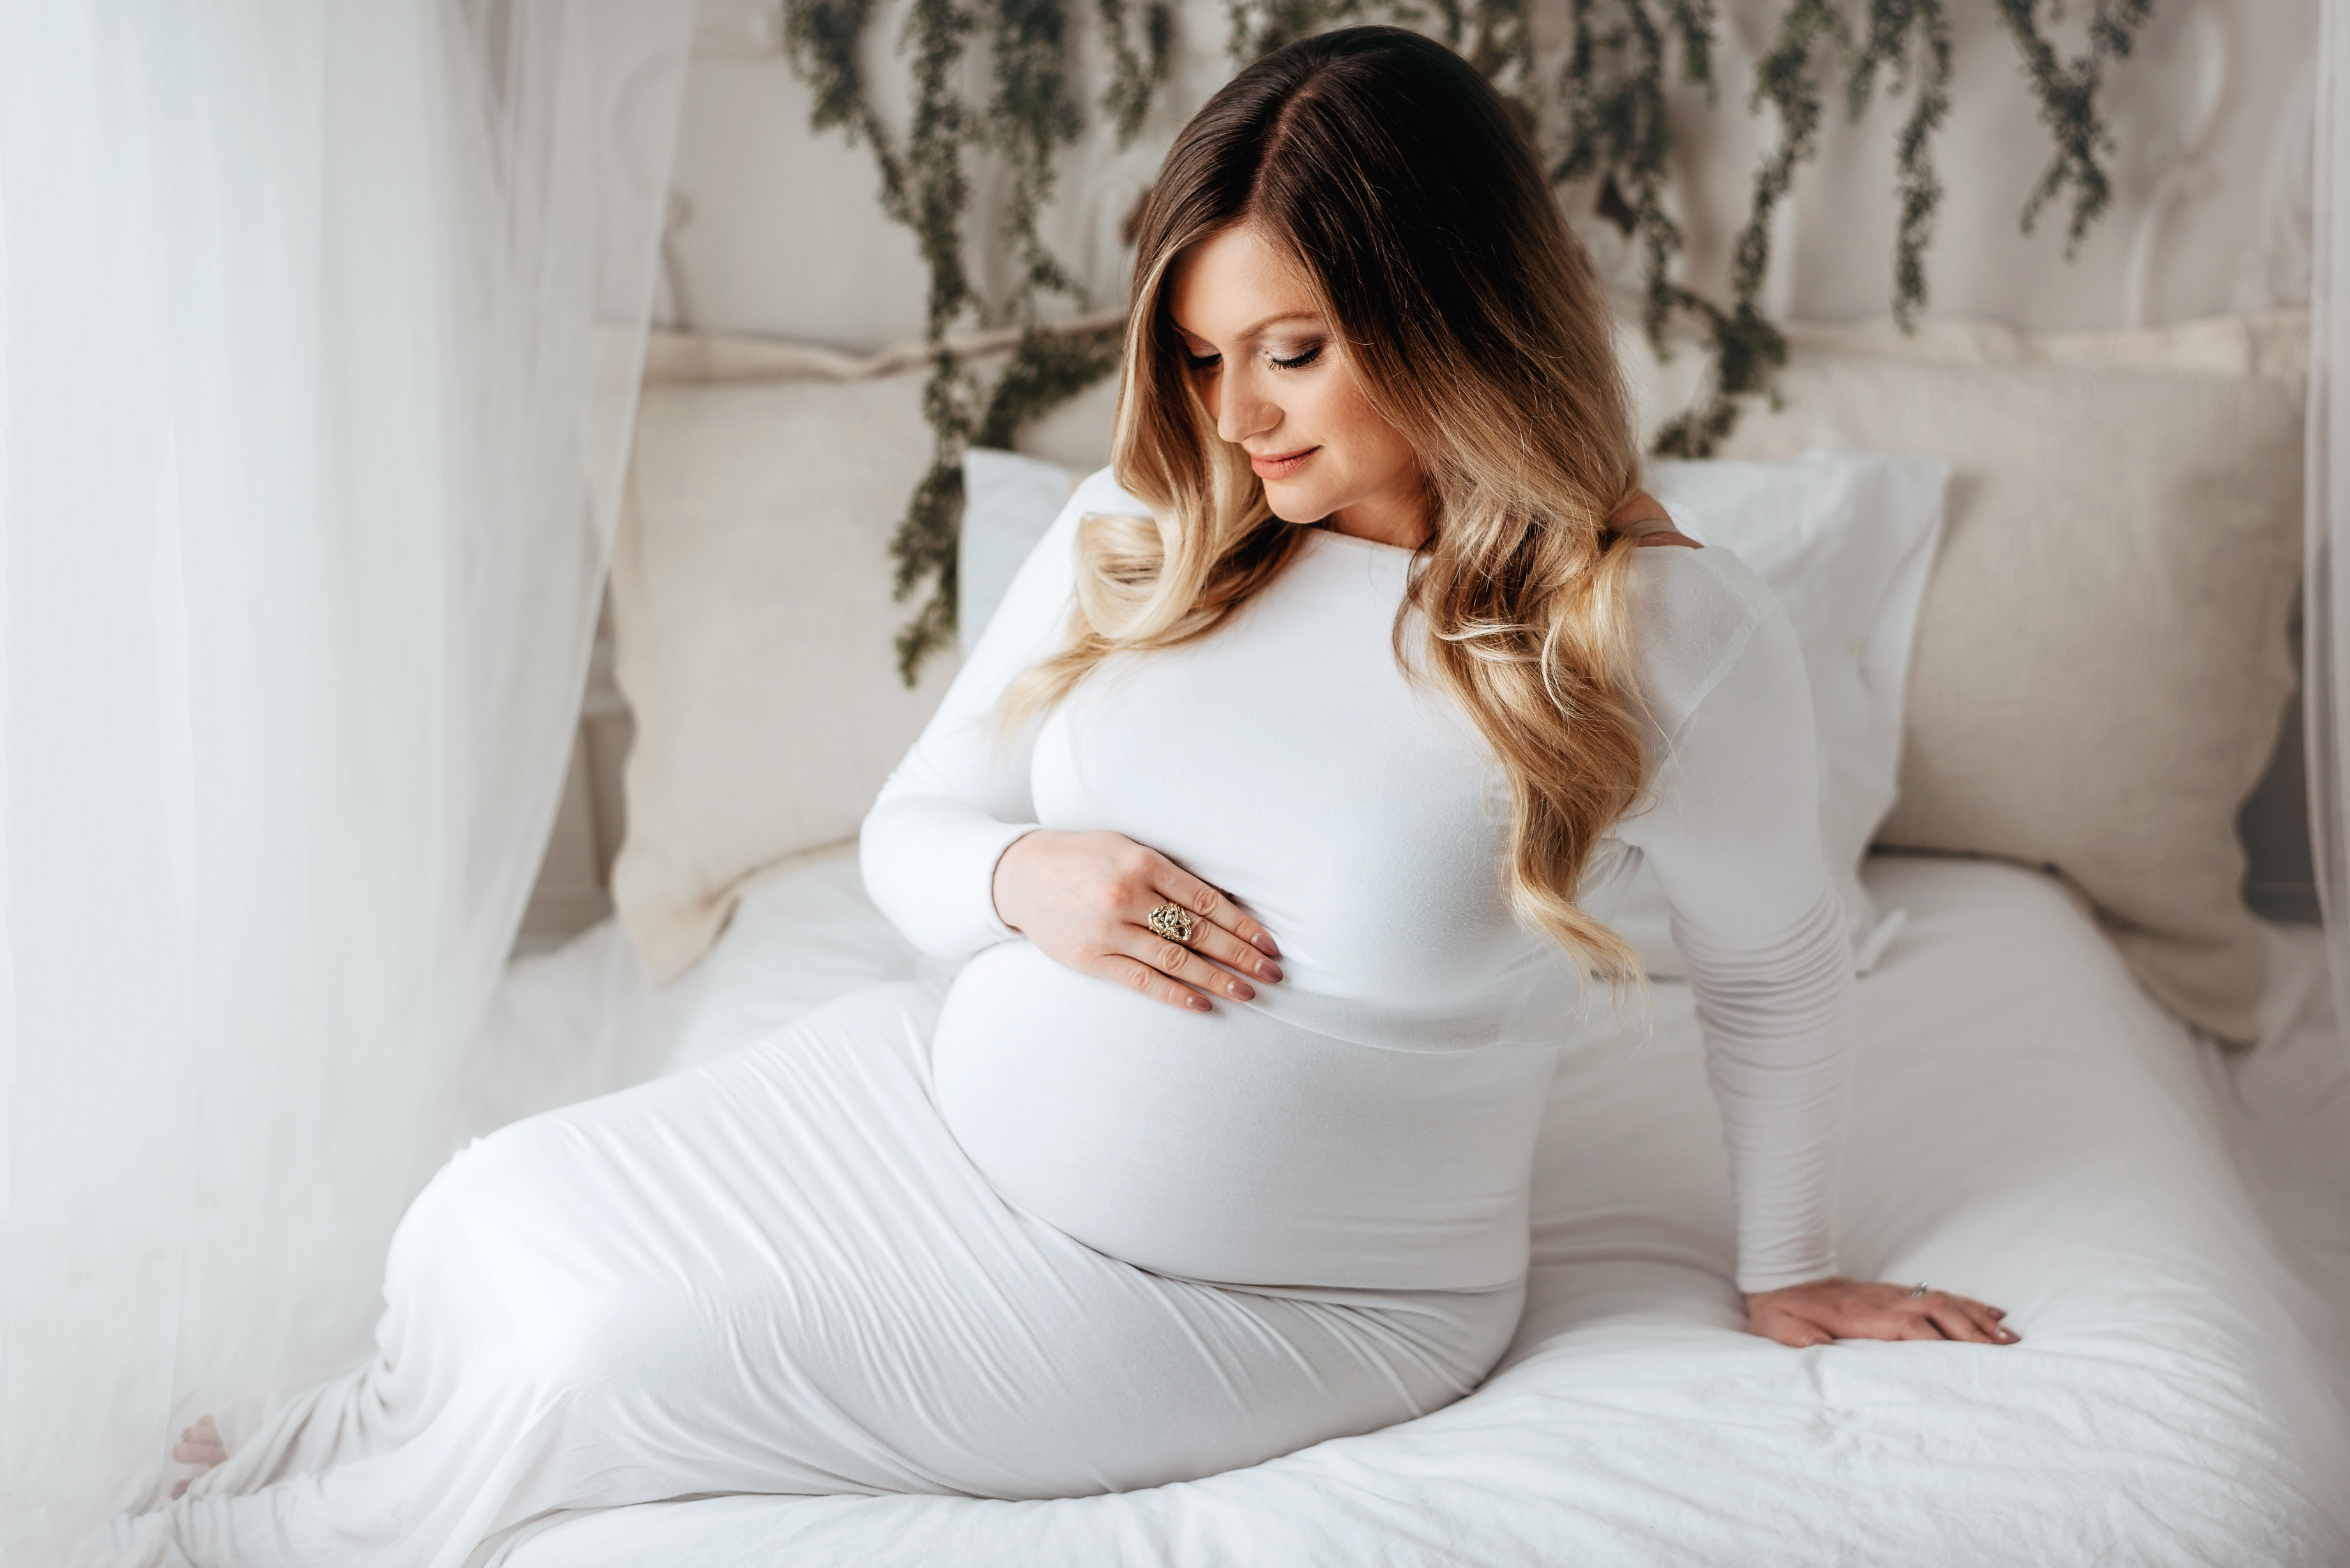 OMG I'm pregnant! My top 5 tips to prep for baby